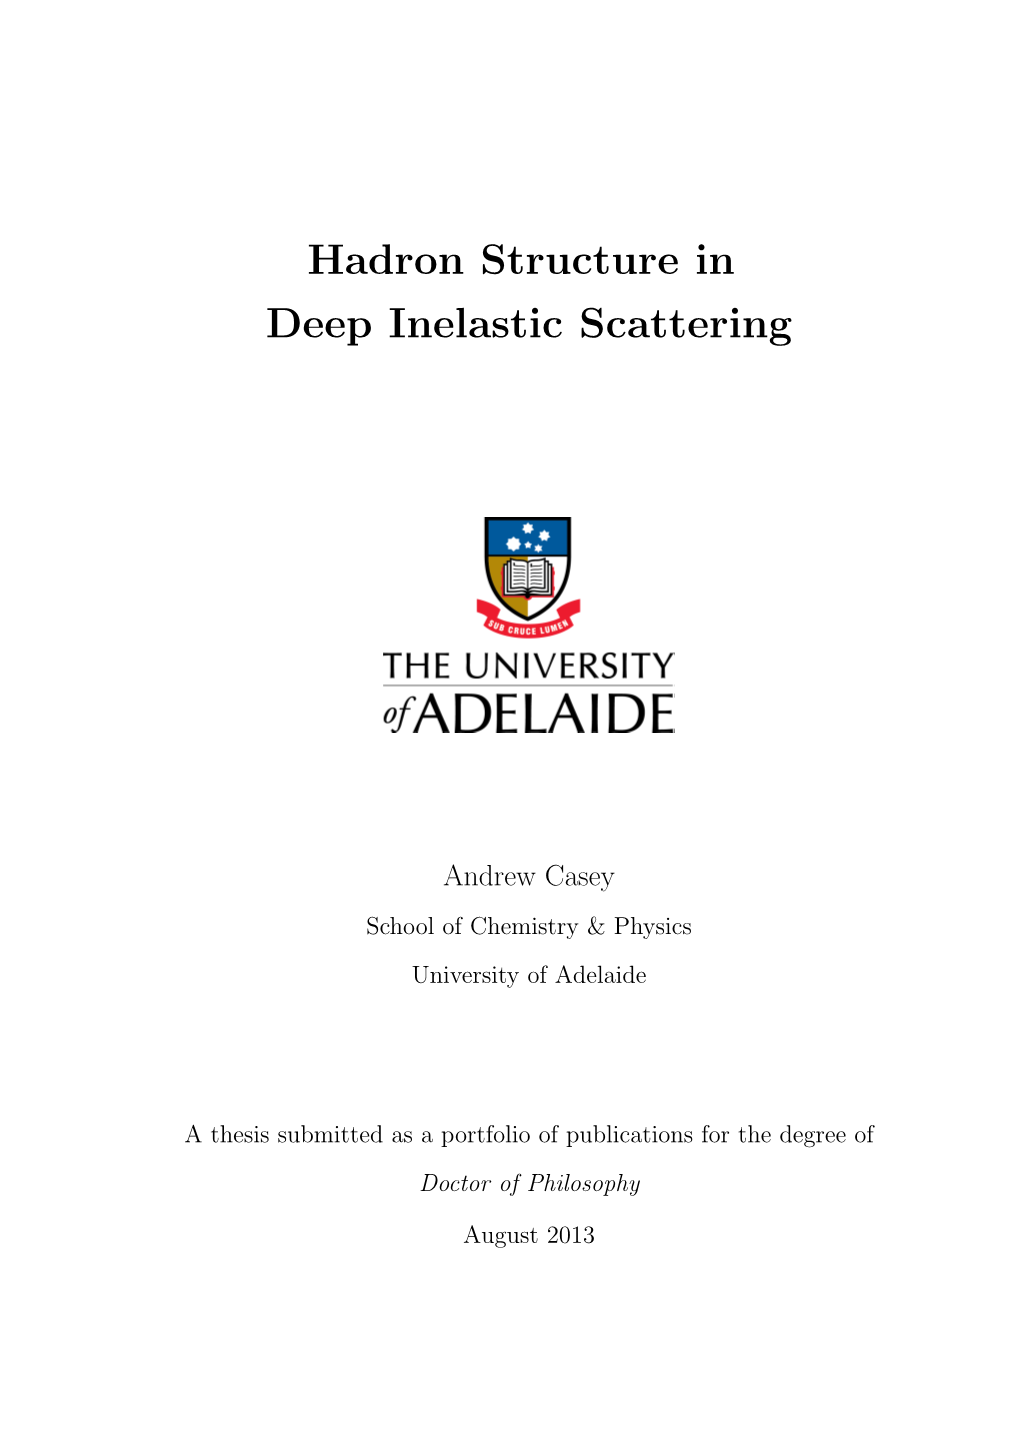 Hadron Structure in Deep Inelastic Scattering